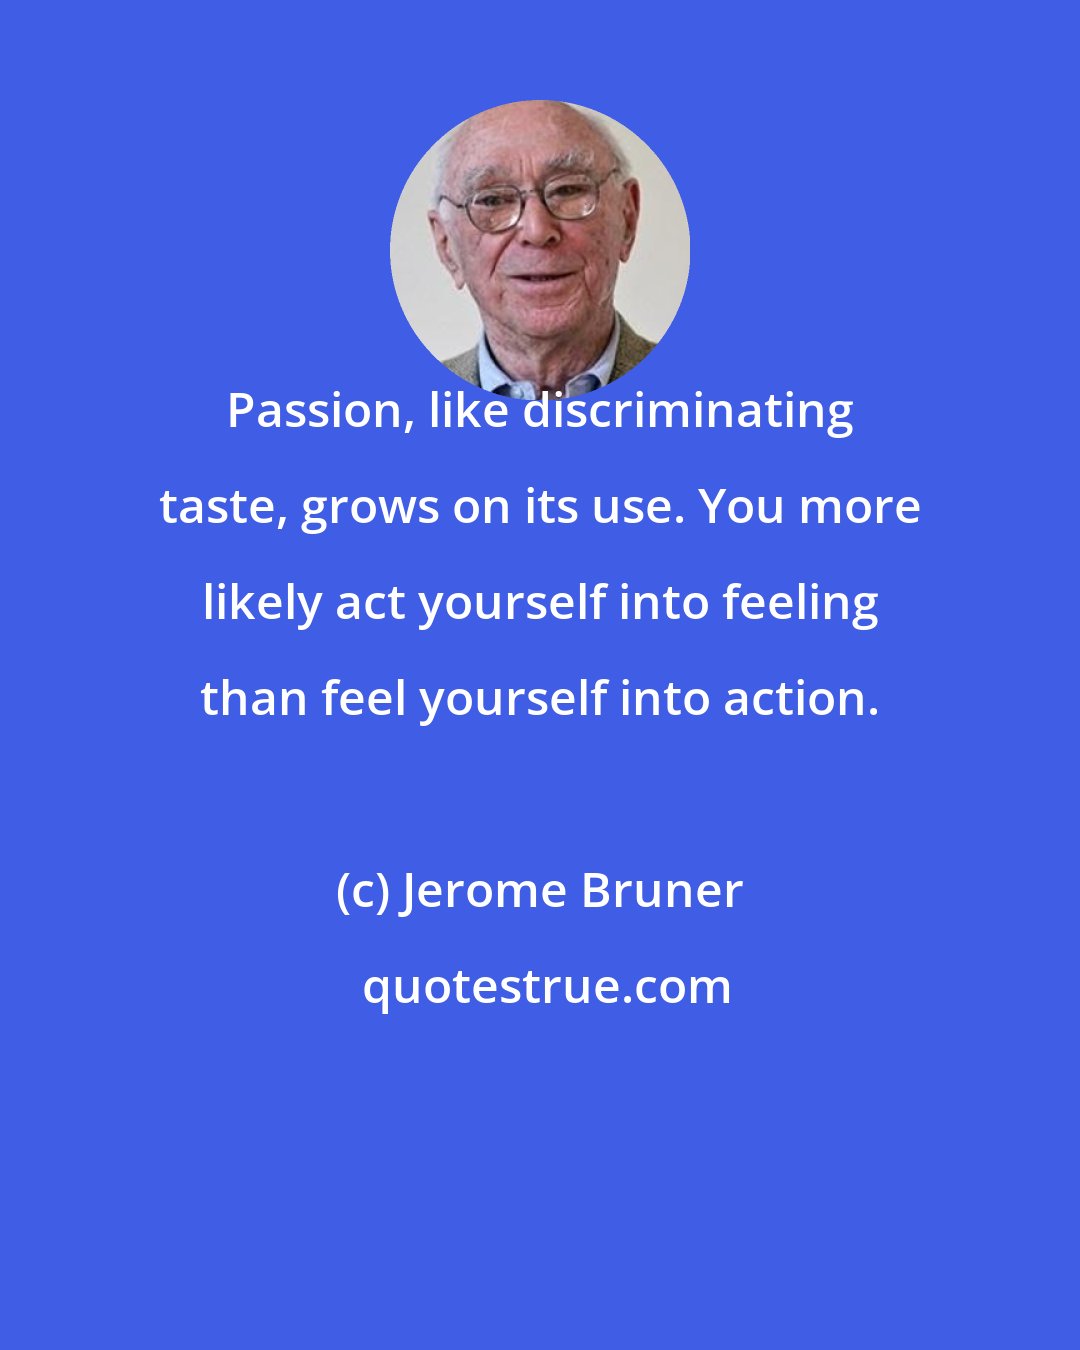 Jerome Bruner: Passion, like discriminating taste, grows on its use. You more likely act yourself into feeling than feel yourself into action.